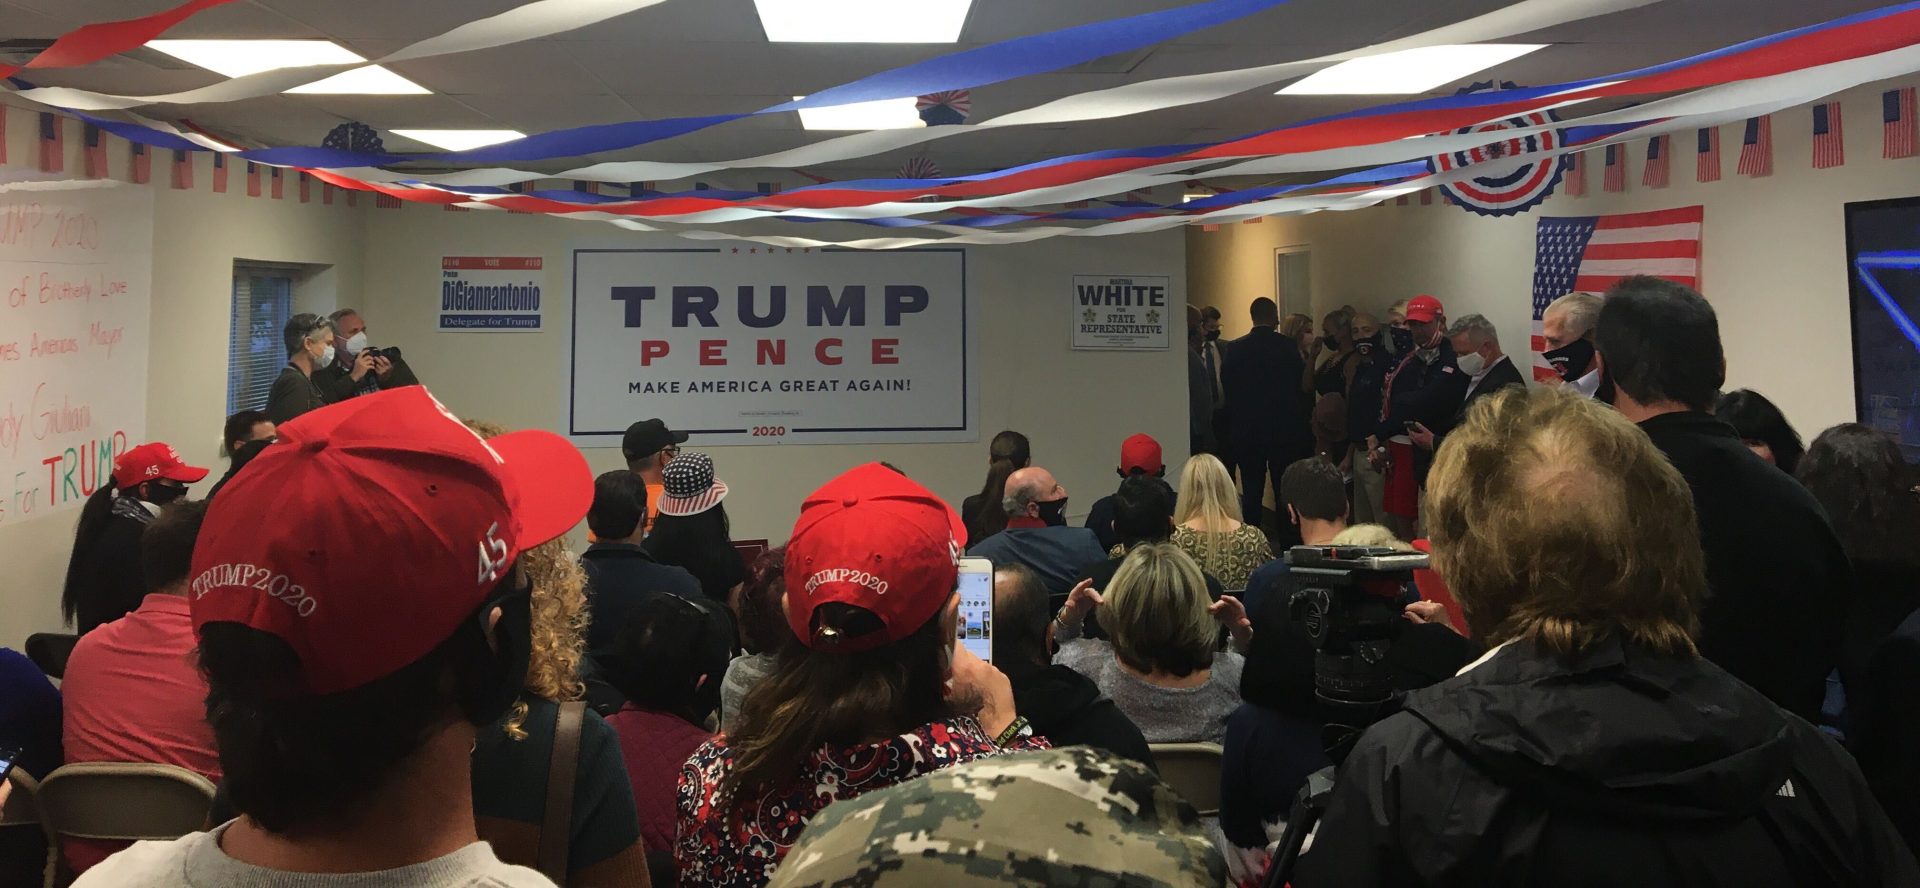 Dozens of Trump supporters packed into a cramped conference room to hear Rudy Giuliani's Columbus Day remarks in Philadelphia